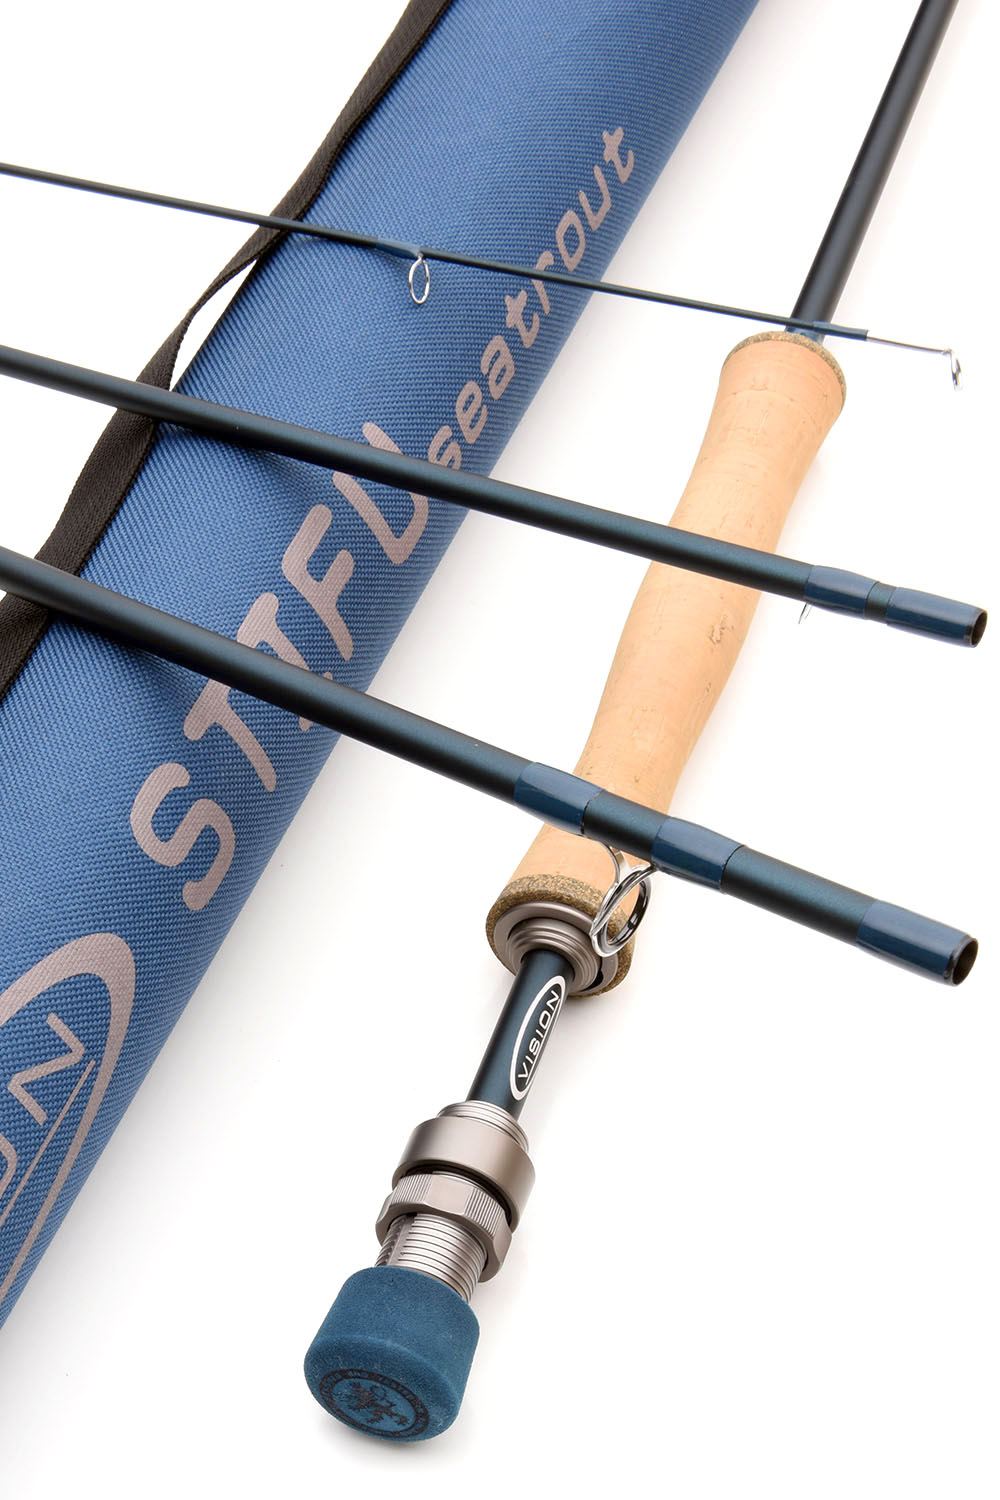 Vision Stifu Seatrout Fly Rod – Guide Flyfishing